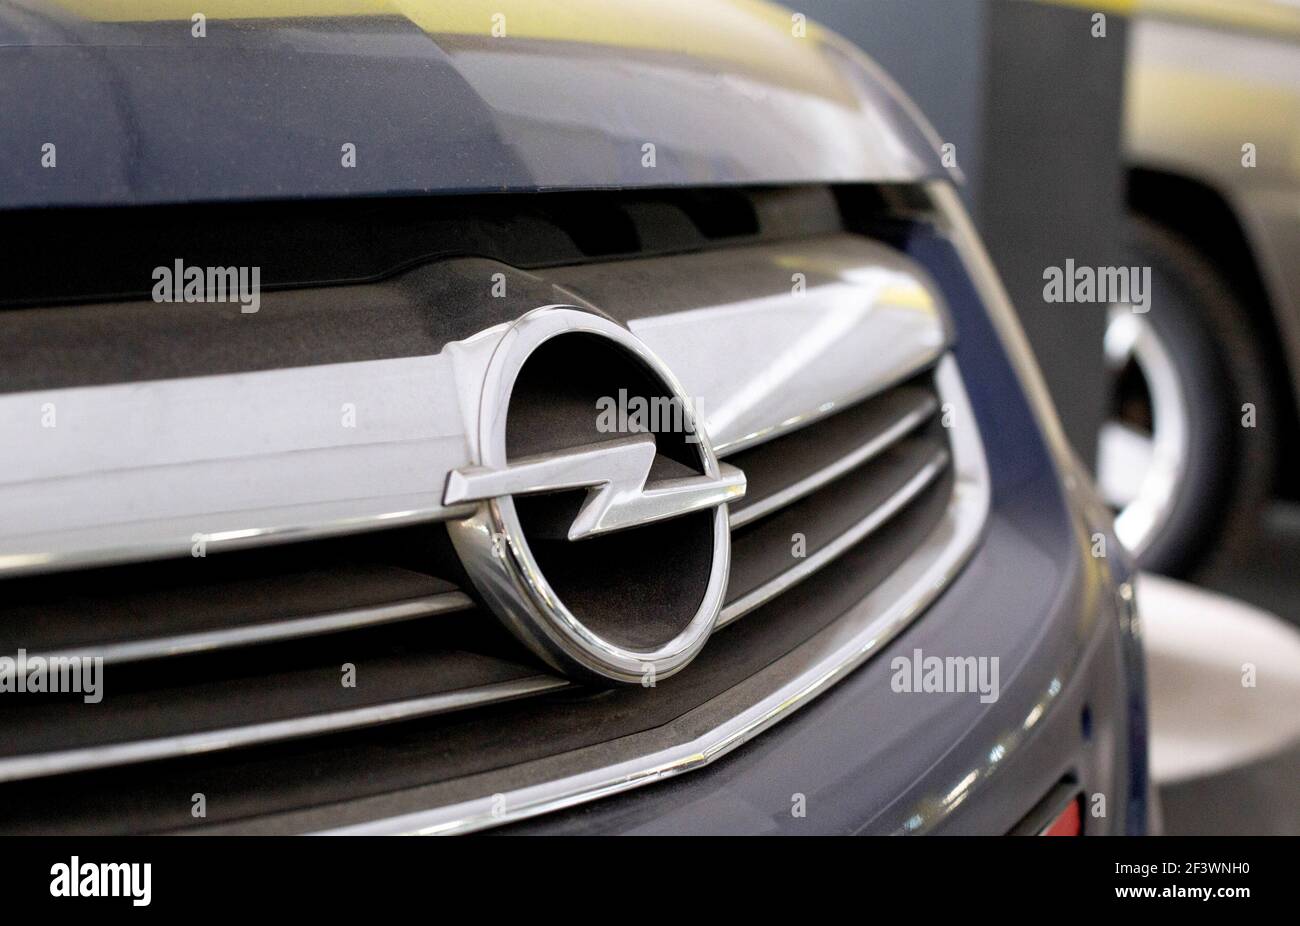 https://c8.alamy.com/comp/2F3WNH0/minsk-belarus-071019-opel-car-emblem-on-the-car-hood-concept-of-brand-and-quality-cars-close-up-industry-2F3WNH0.jpg